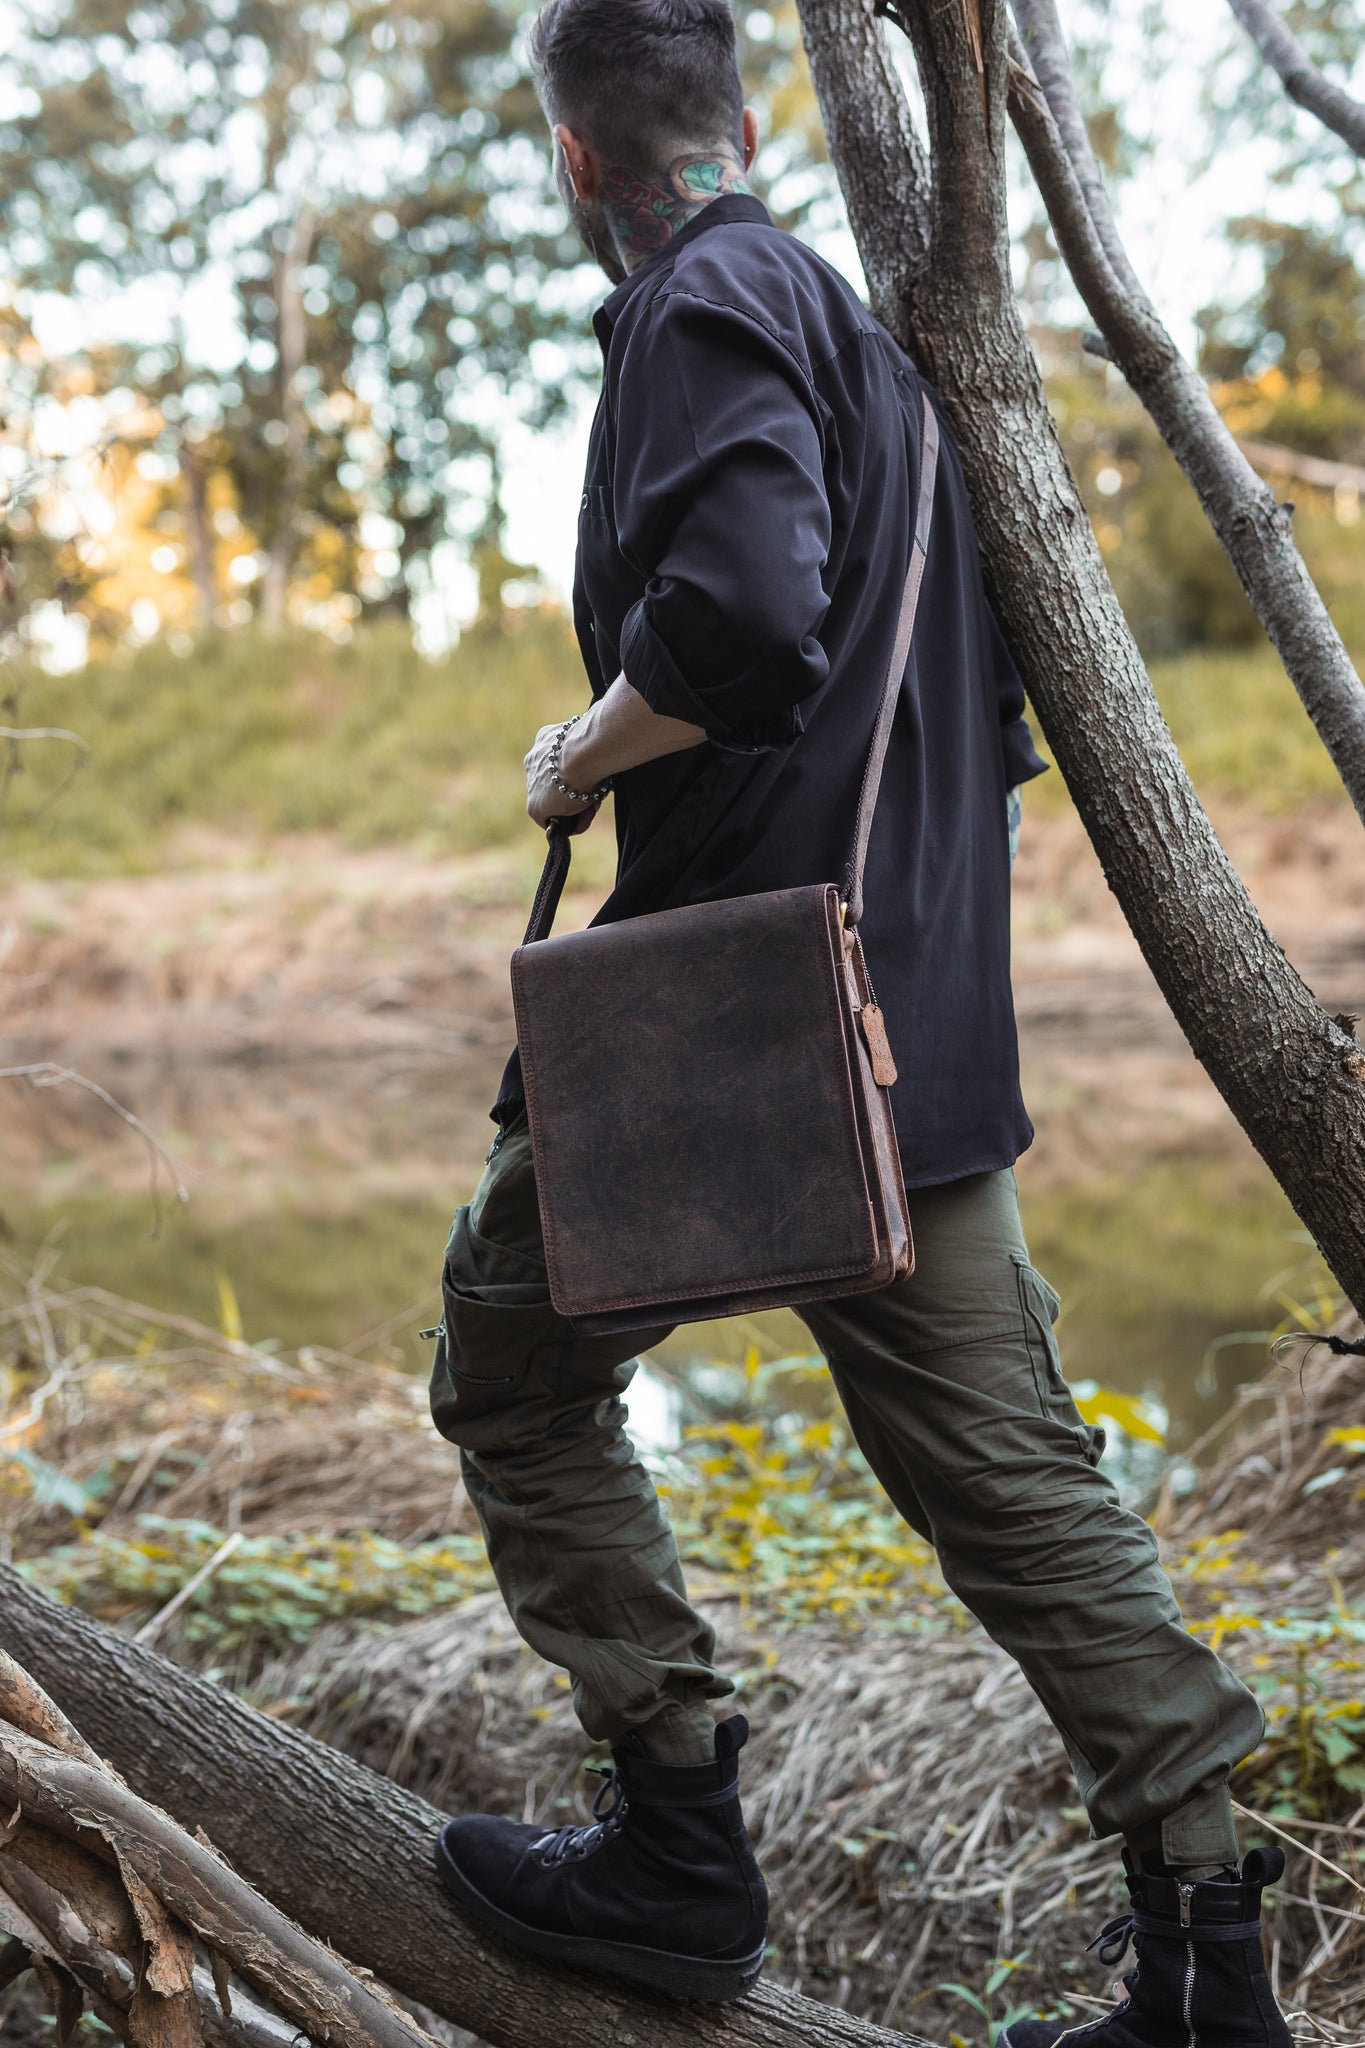 Shop our range of satchels, satchel bags and shoulder bags For men and Women!